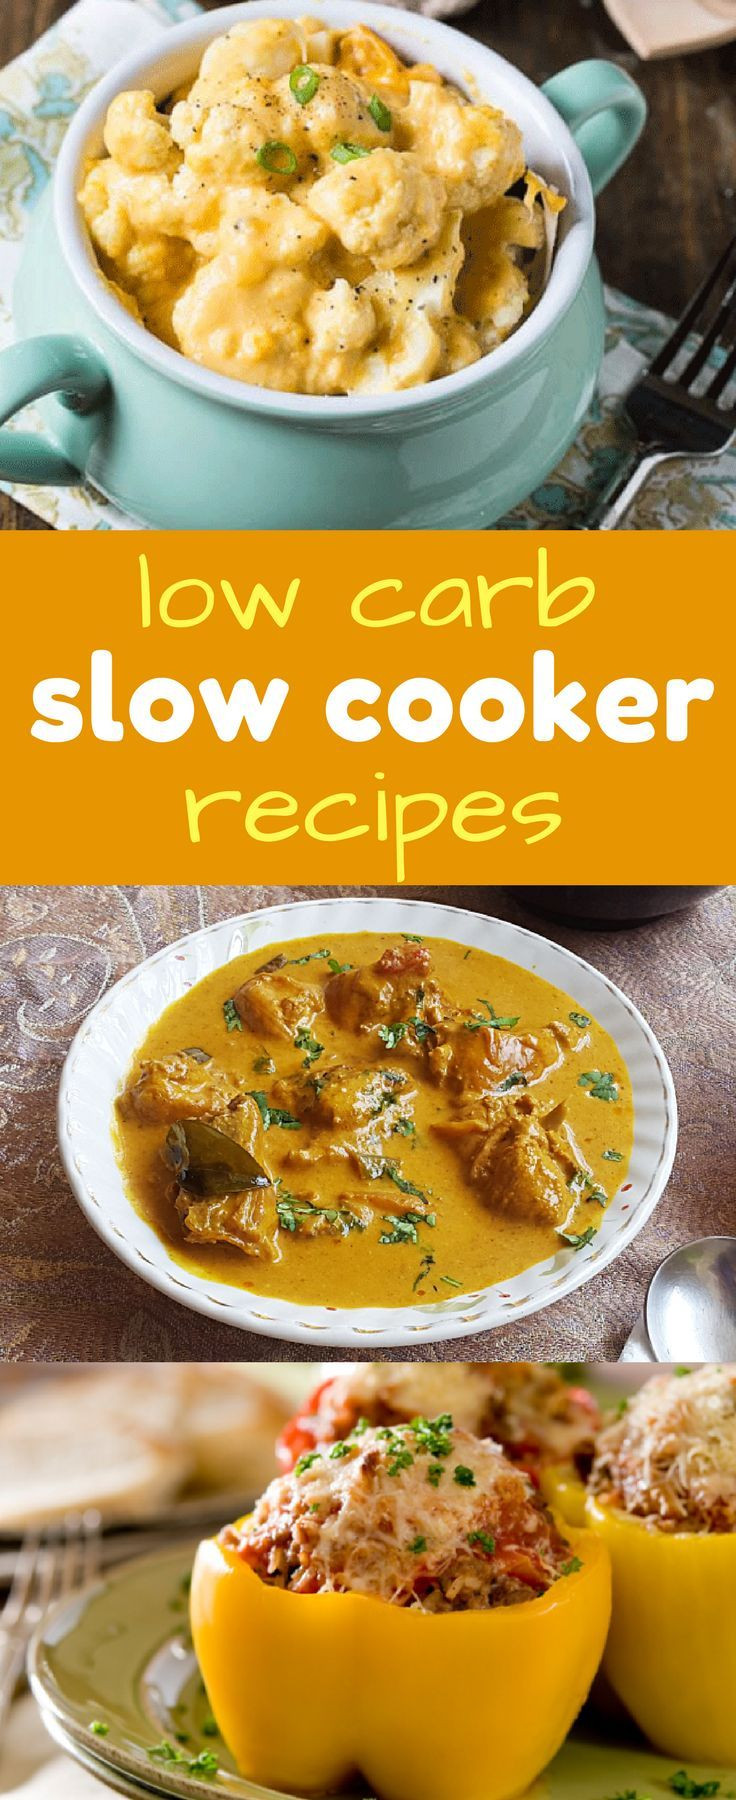 Low Cholesterol Slow Cooker Recipes
 Low Carb Slow Cooker Recipes